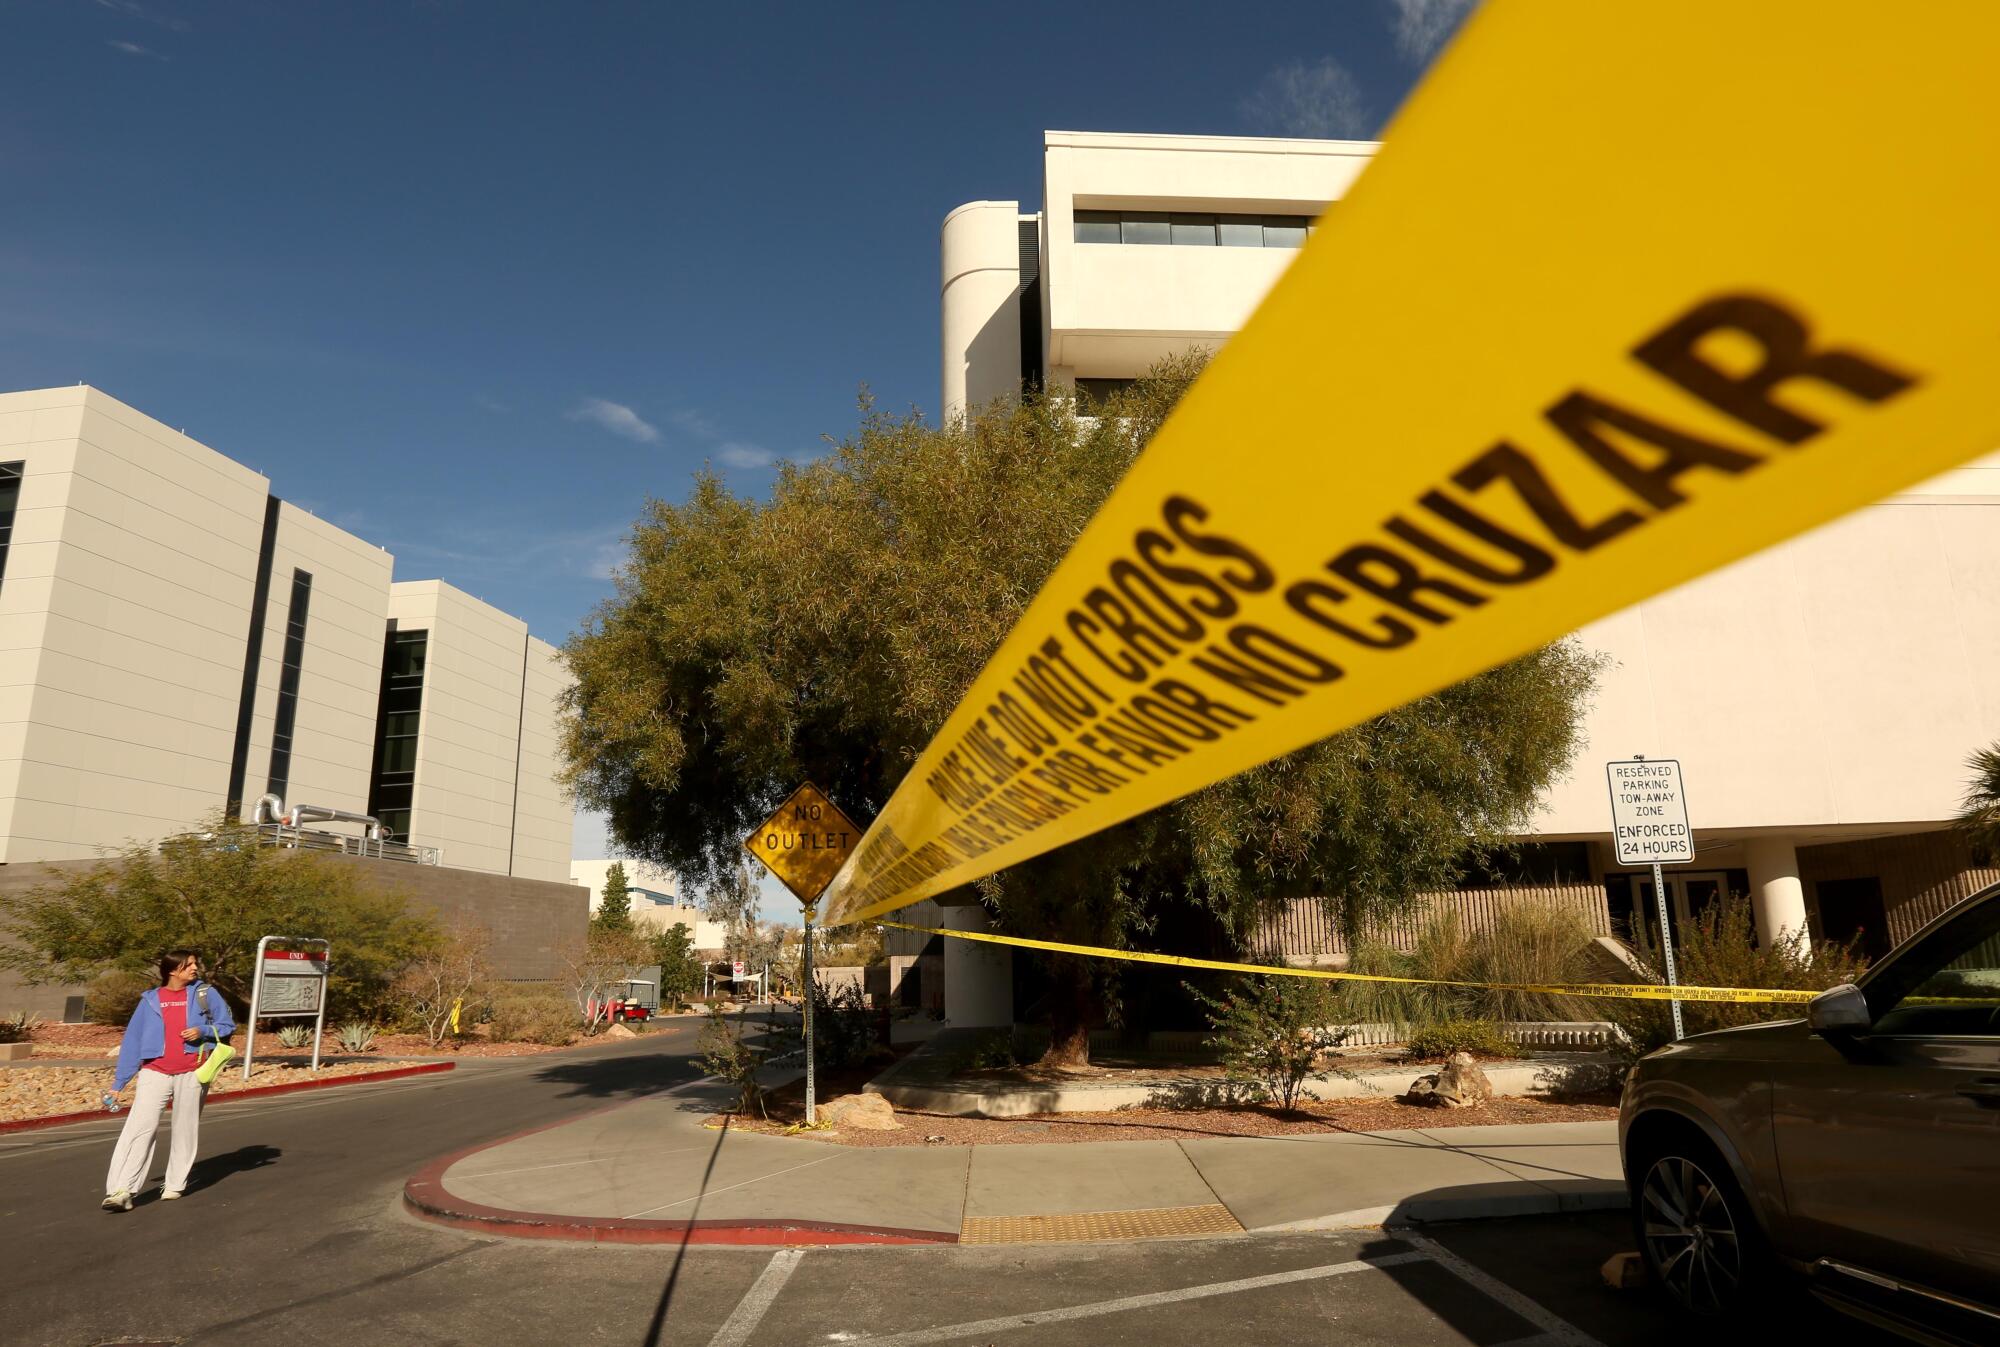 A student walks past police tape outside UNLV's Frank and Estella Beam Hall, where the shooting took place.